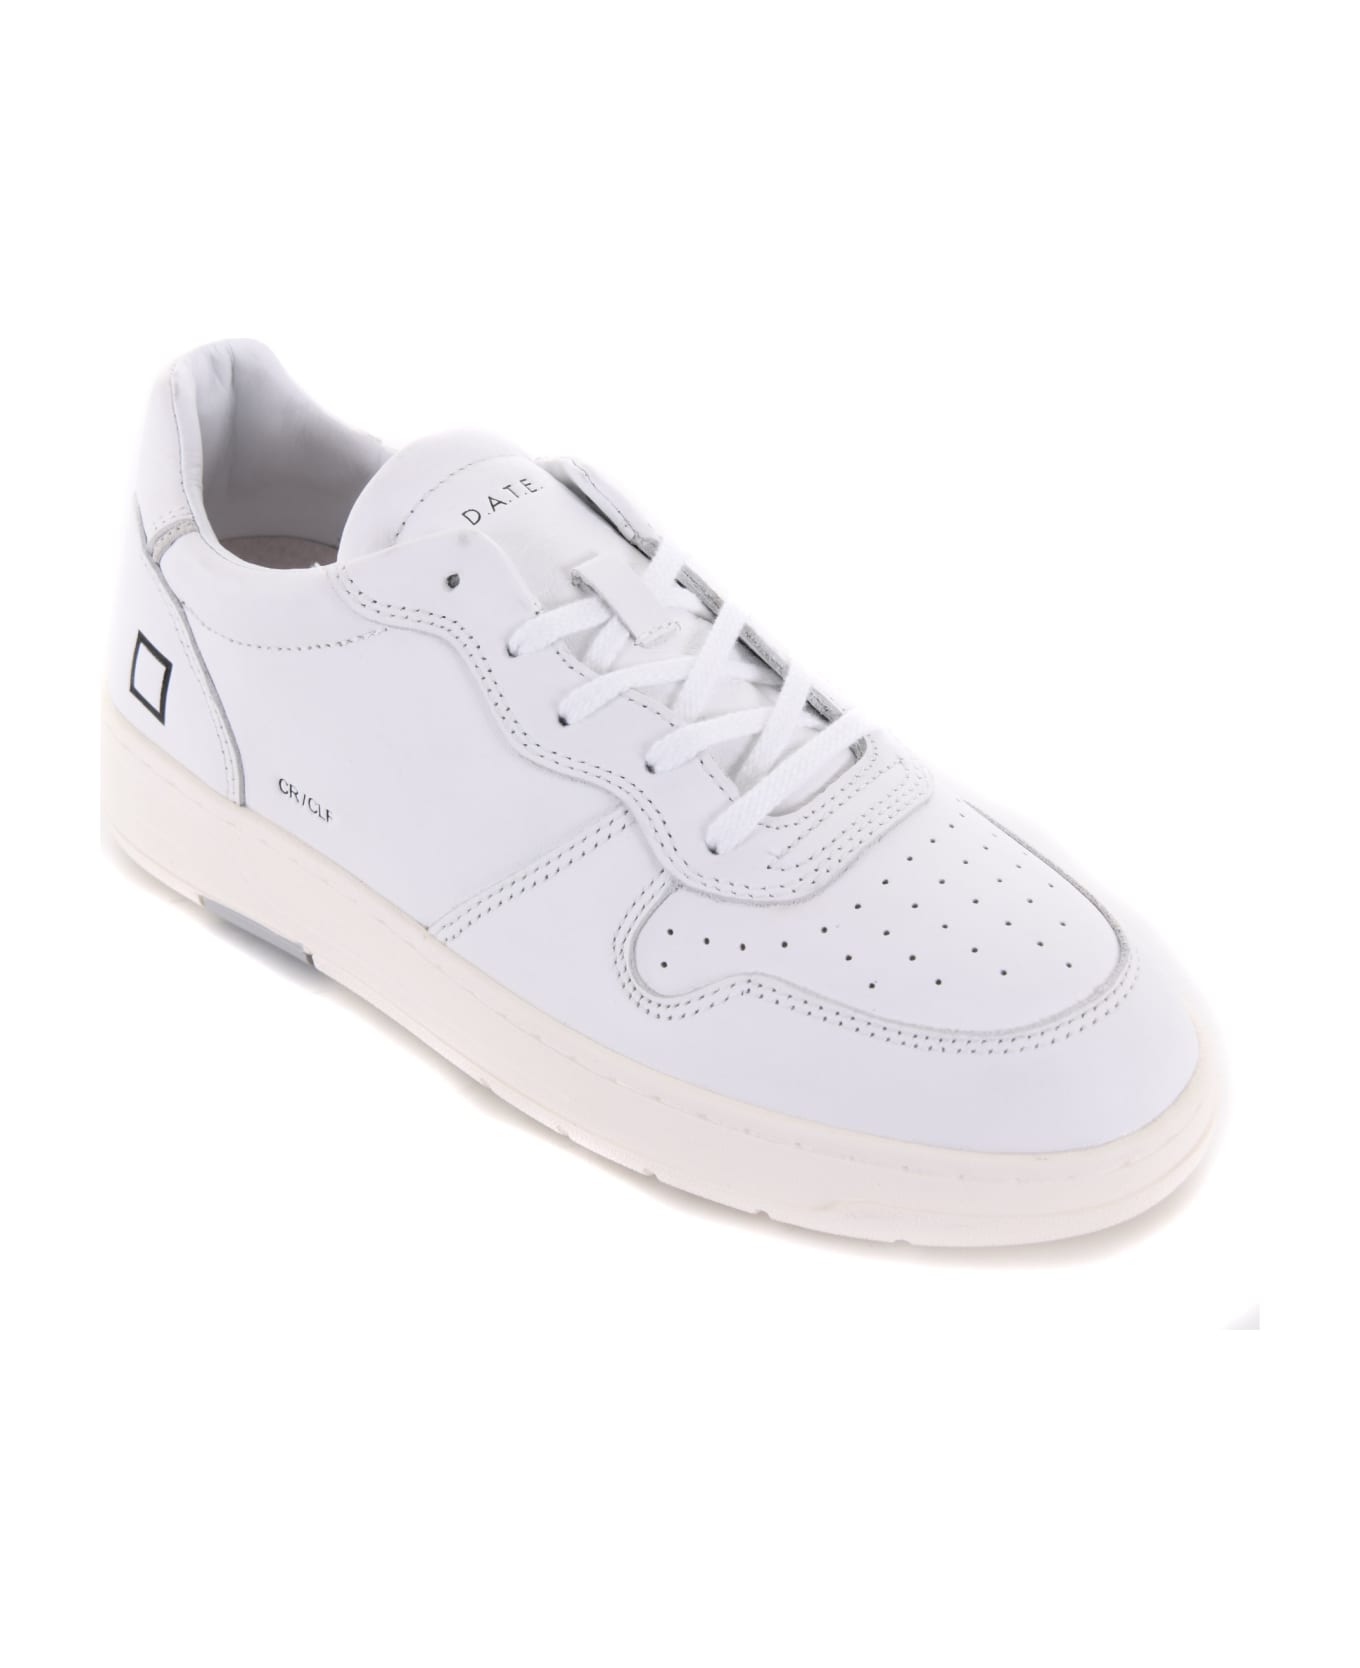 D.A.T.E. Sneakers "court Calf" Leather - Bianco スニーカー